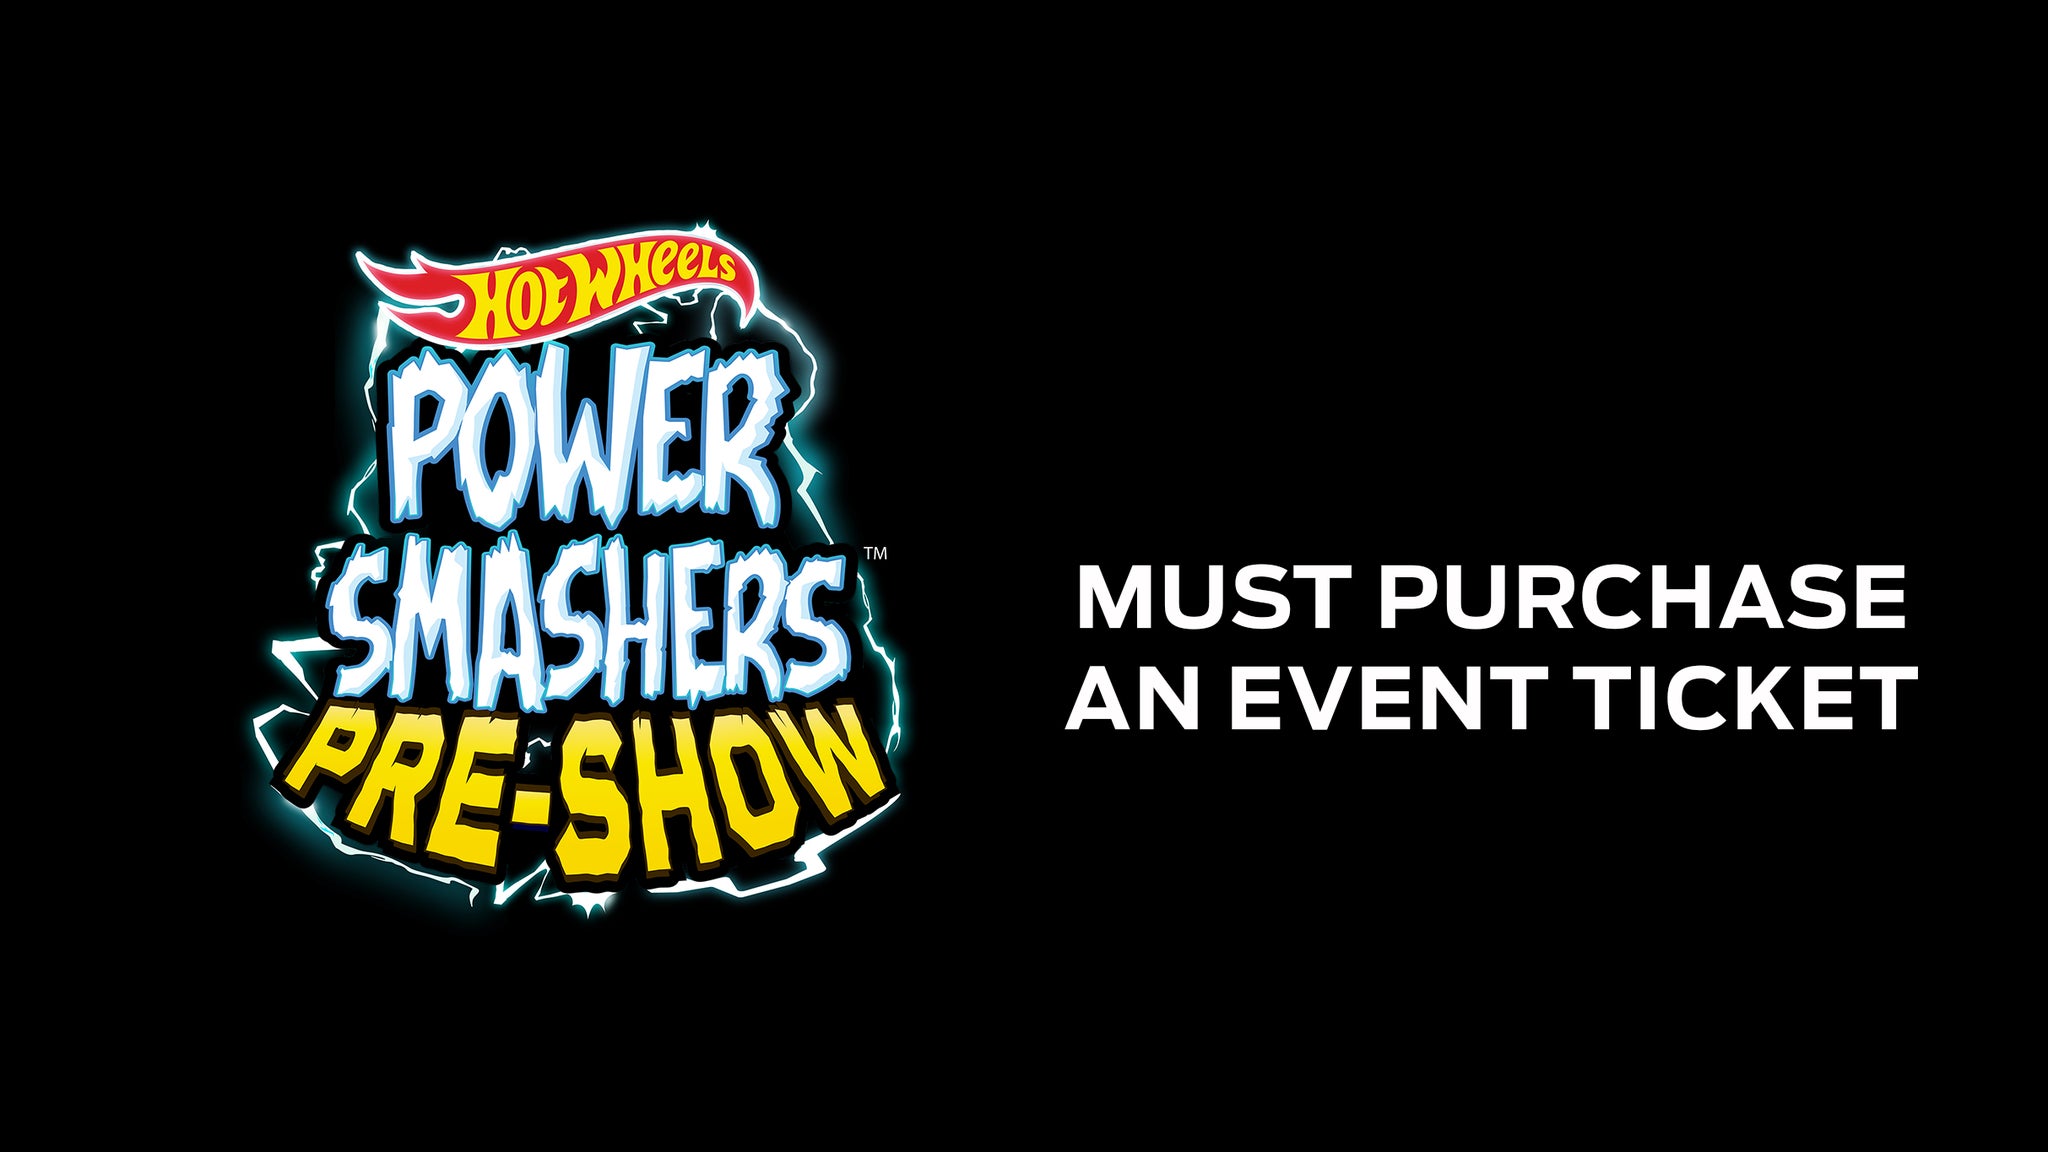 Hot Wheels Power Smashers From 5:00PM - 6:15PM